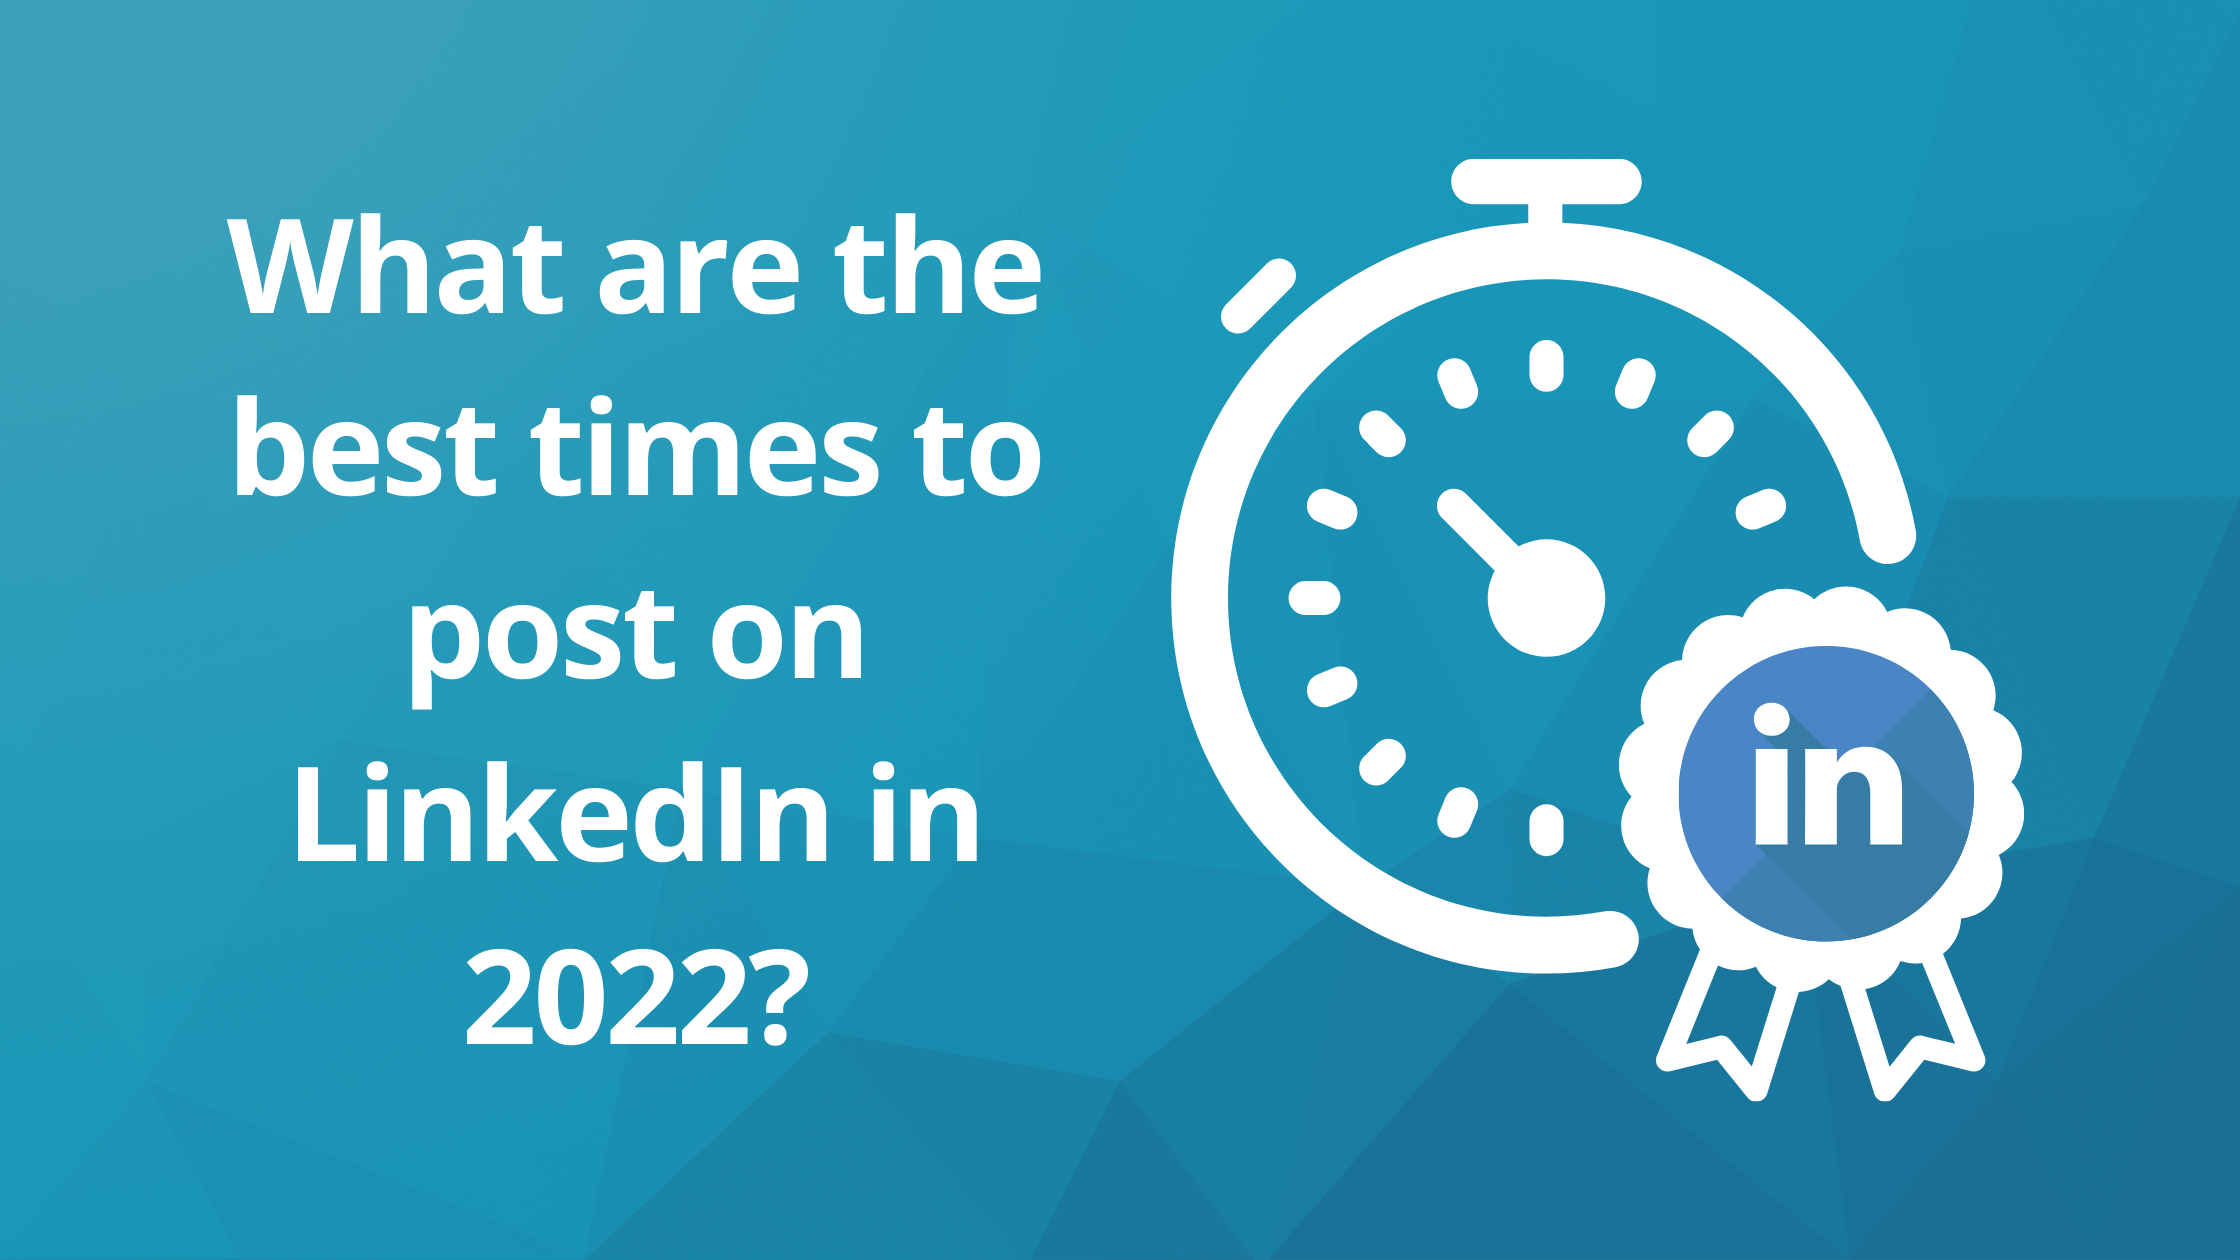 What are the Best times to post on LinkedIn in 2022?